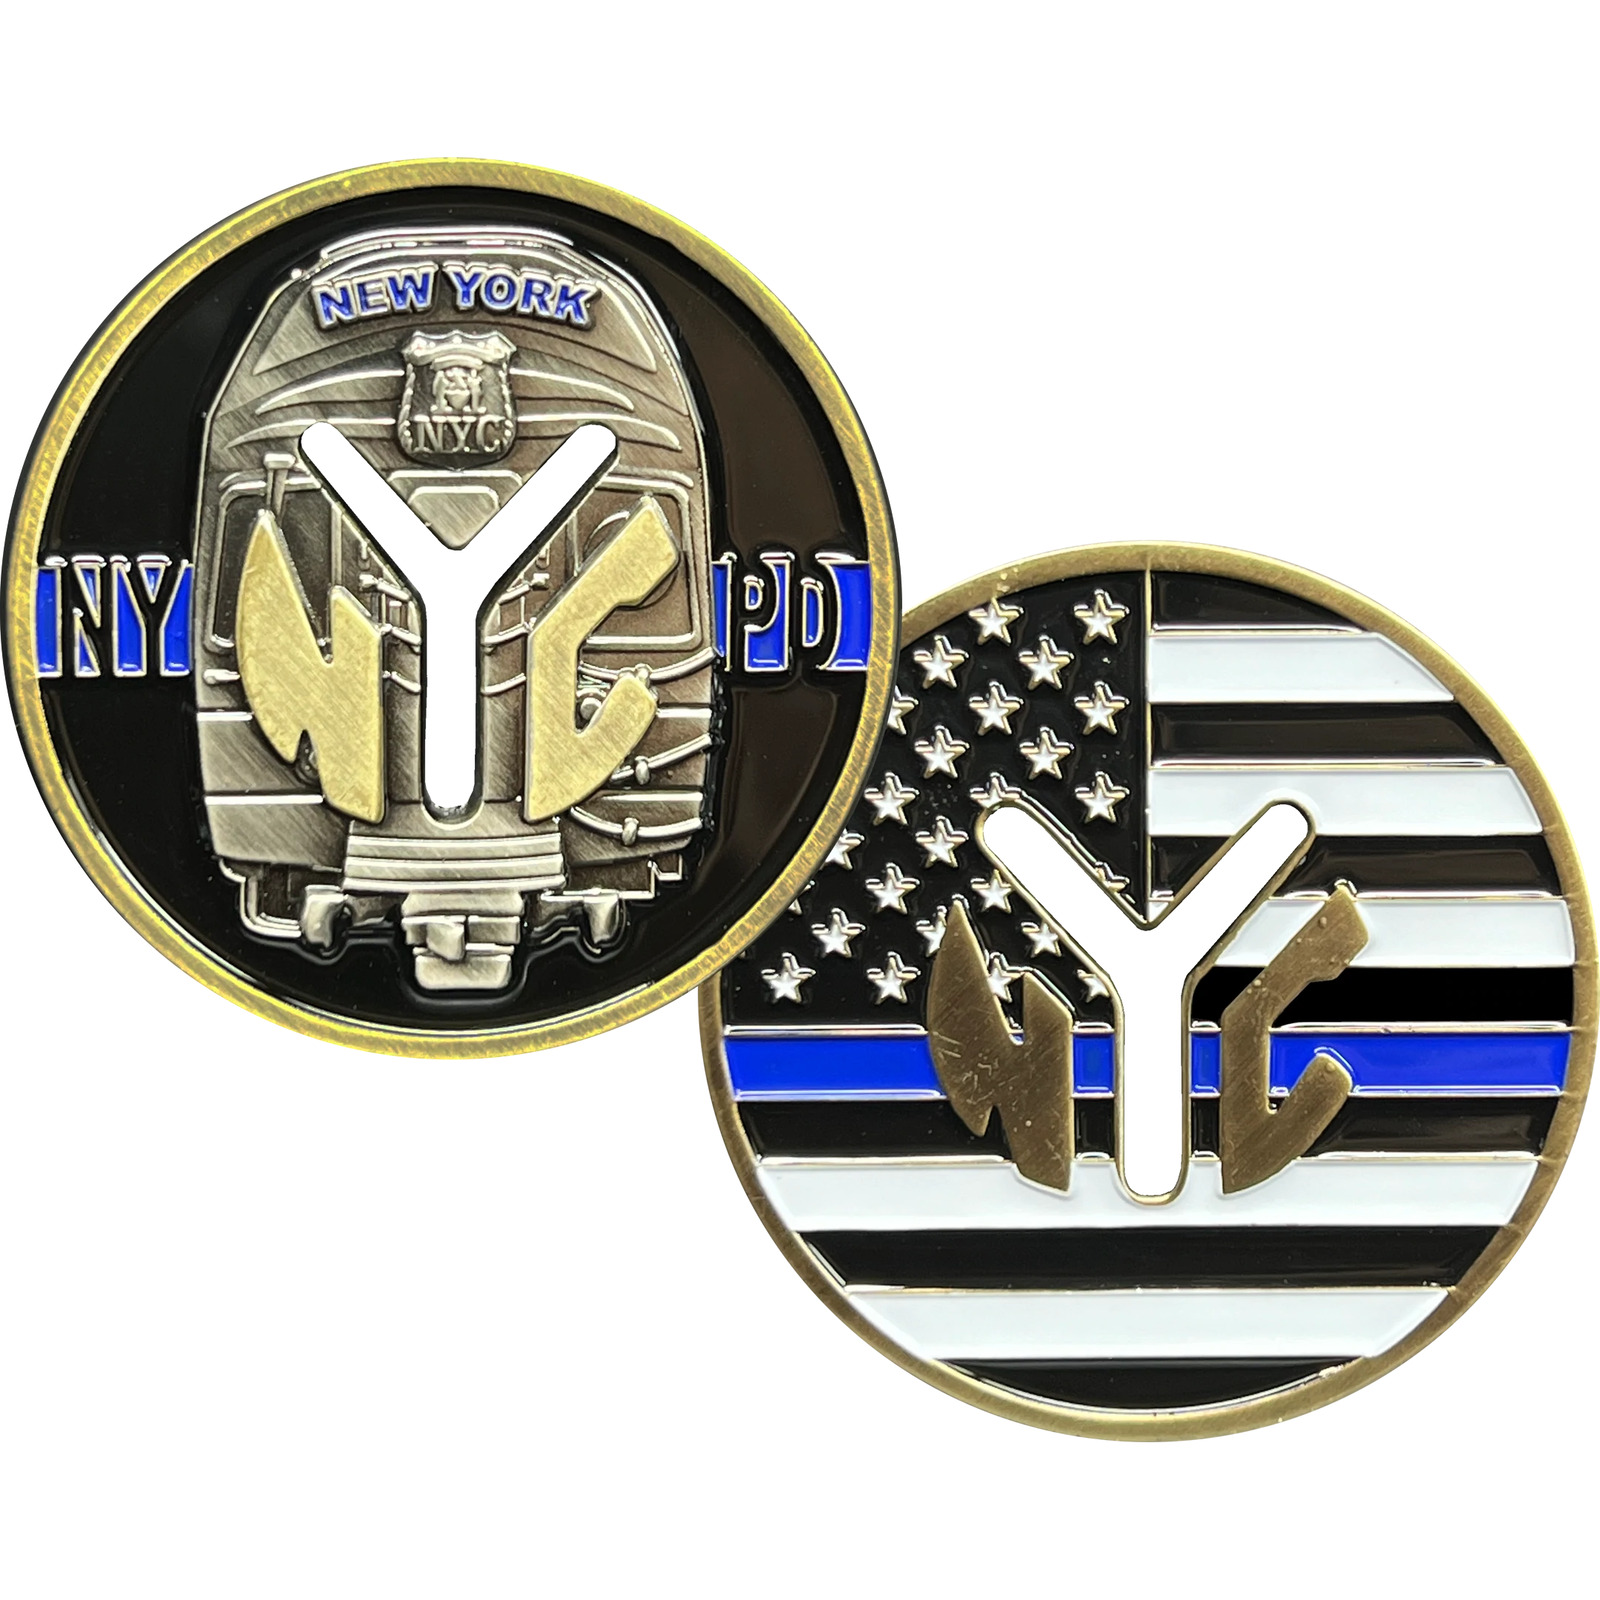 GL1-001 New York City Transit Police Department Thin Blue Line Challenge Coin